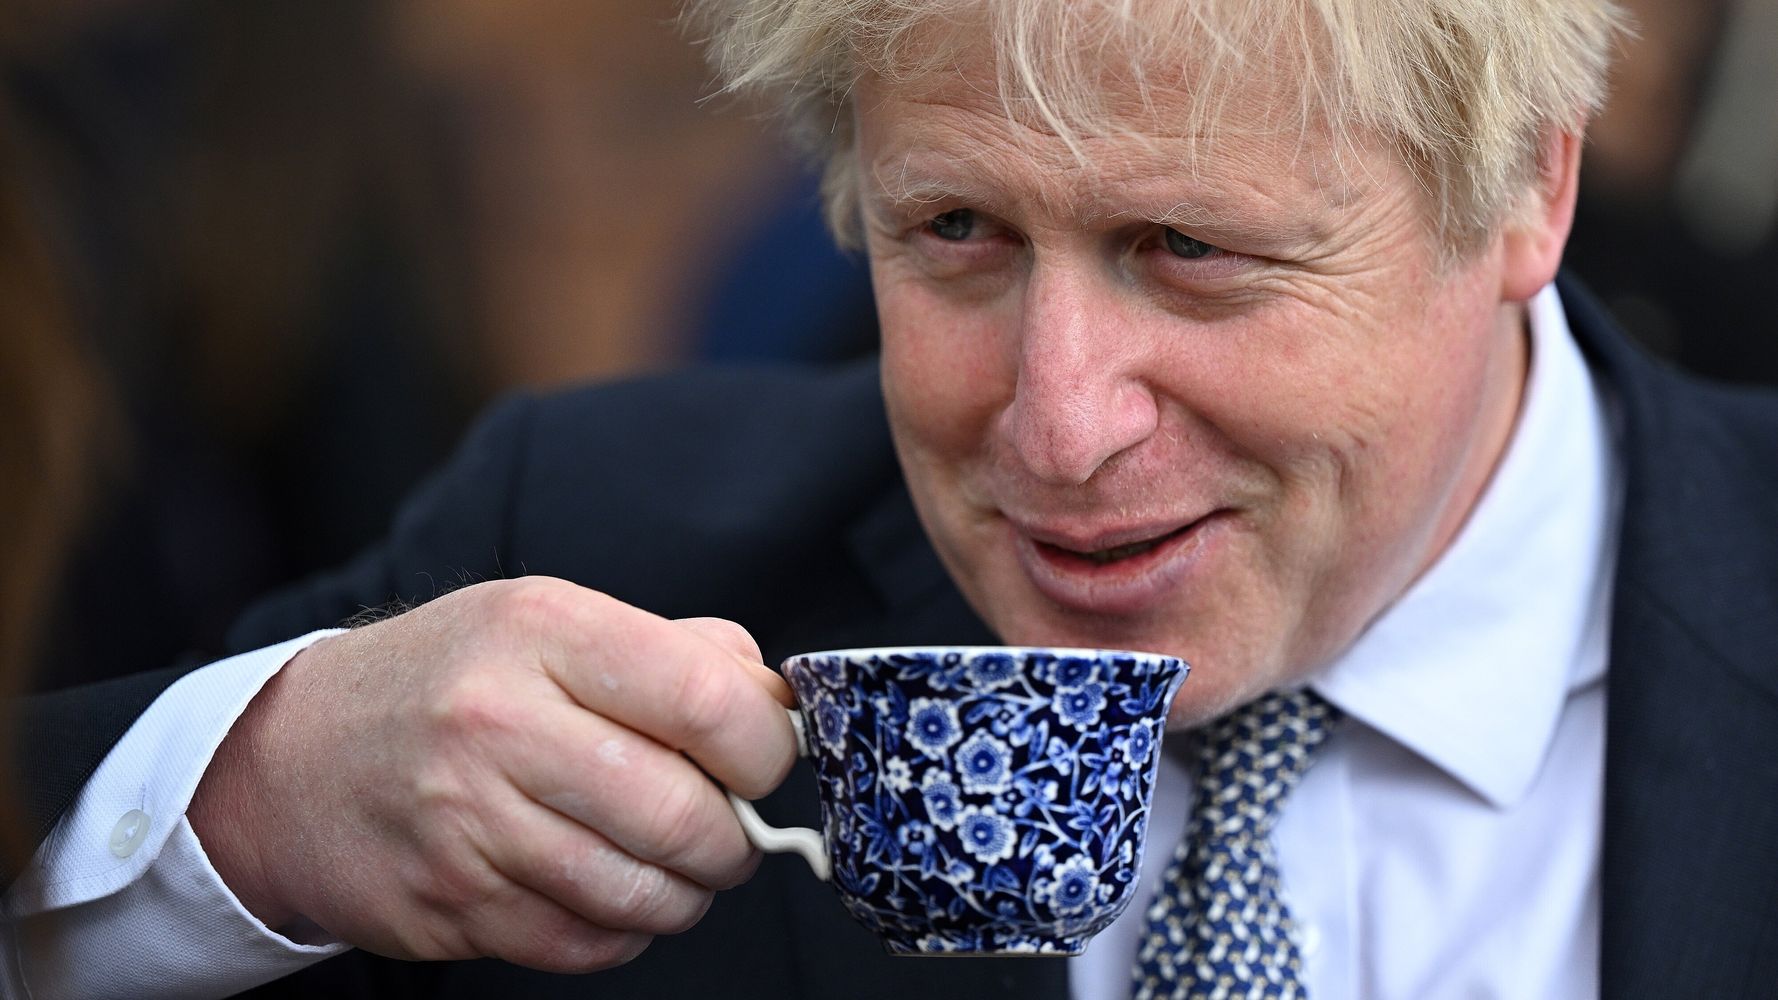 Boris Johnson Alludes To His Cheese Habit To Justify WFH Crackdown